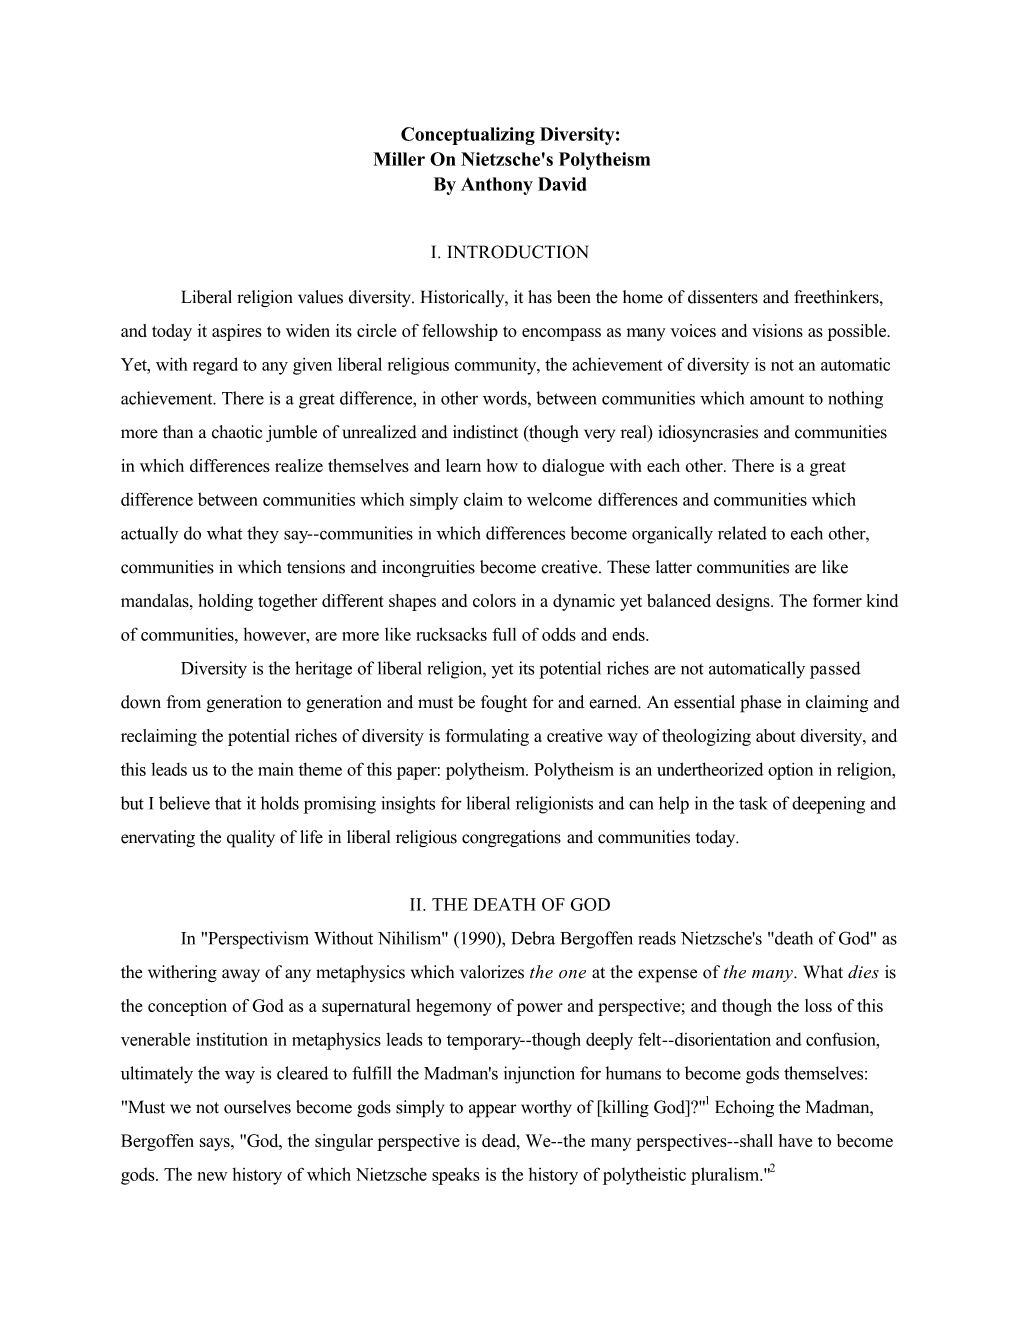 Conceptualizing Diversity: Miller on Nietzsche's Polytheism by Anthony David